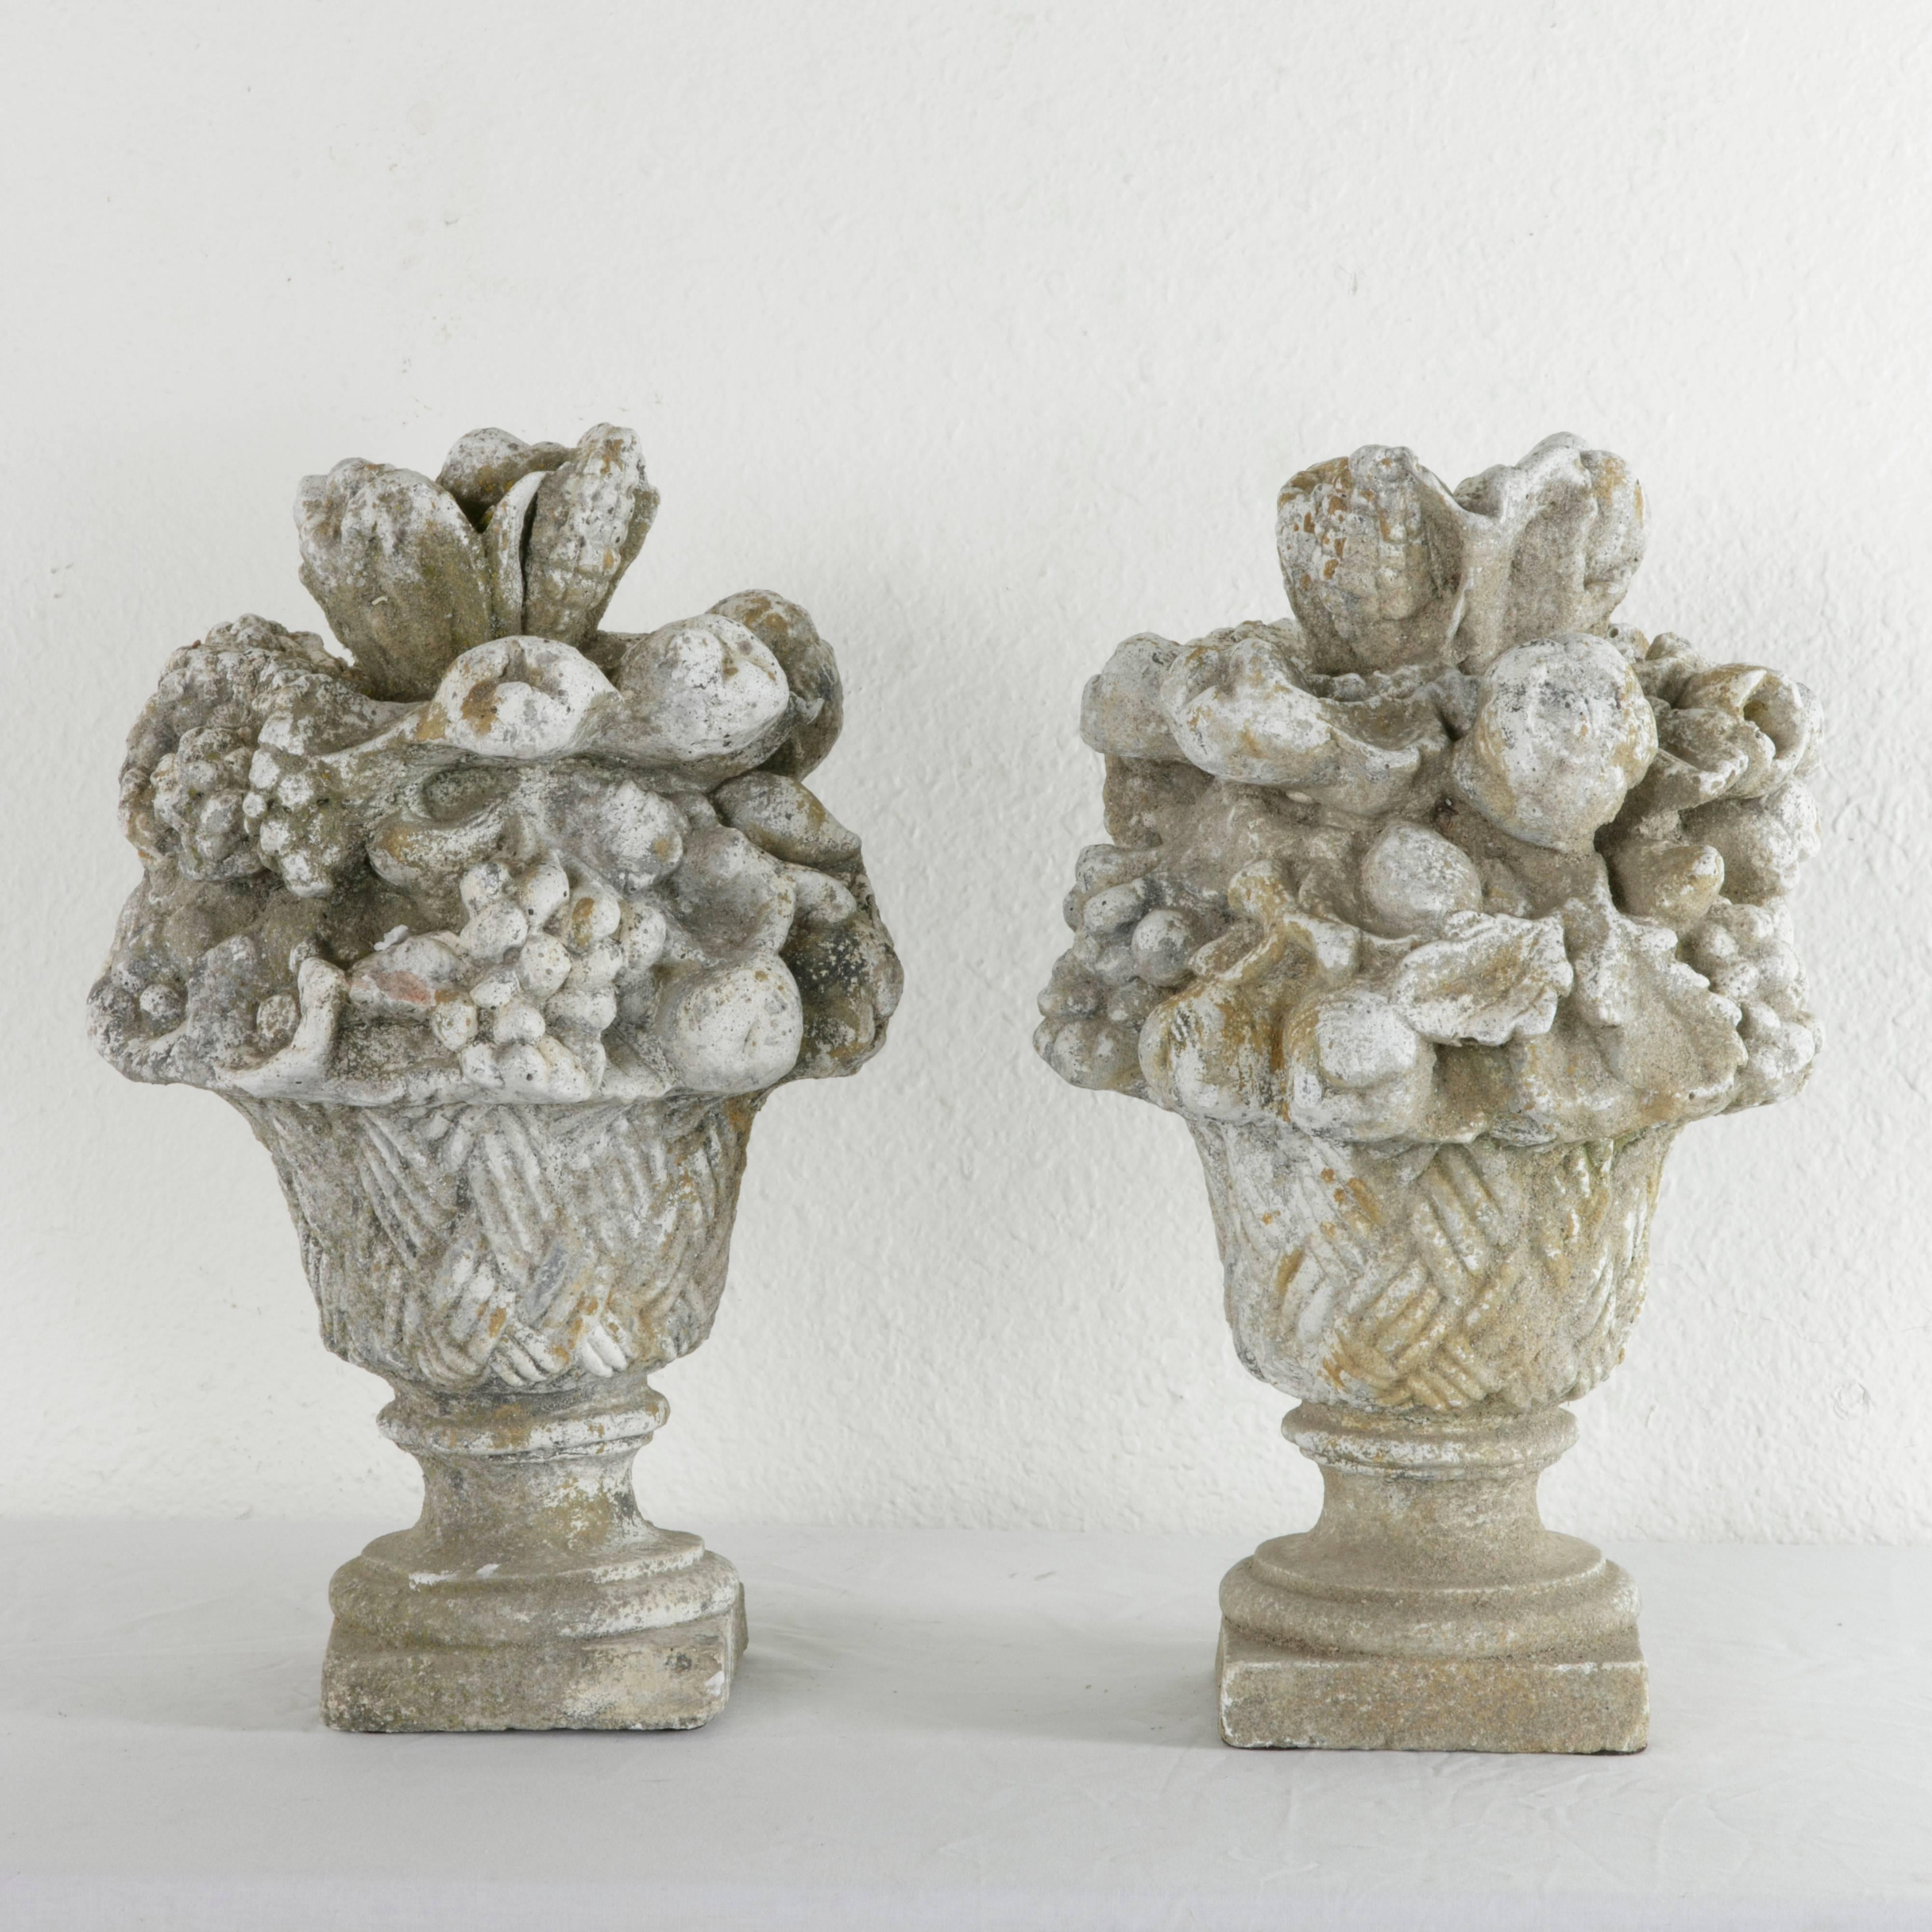 This pair of early 20th century French cast stone sculptures features an abundant bouquet of fruit artfully arranged in a woven basket. Vestiges of lichen and moss as well as a weathered patina are evidence of its former setting in a Normandy